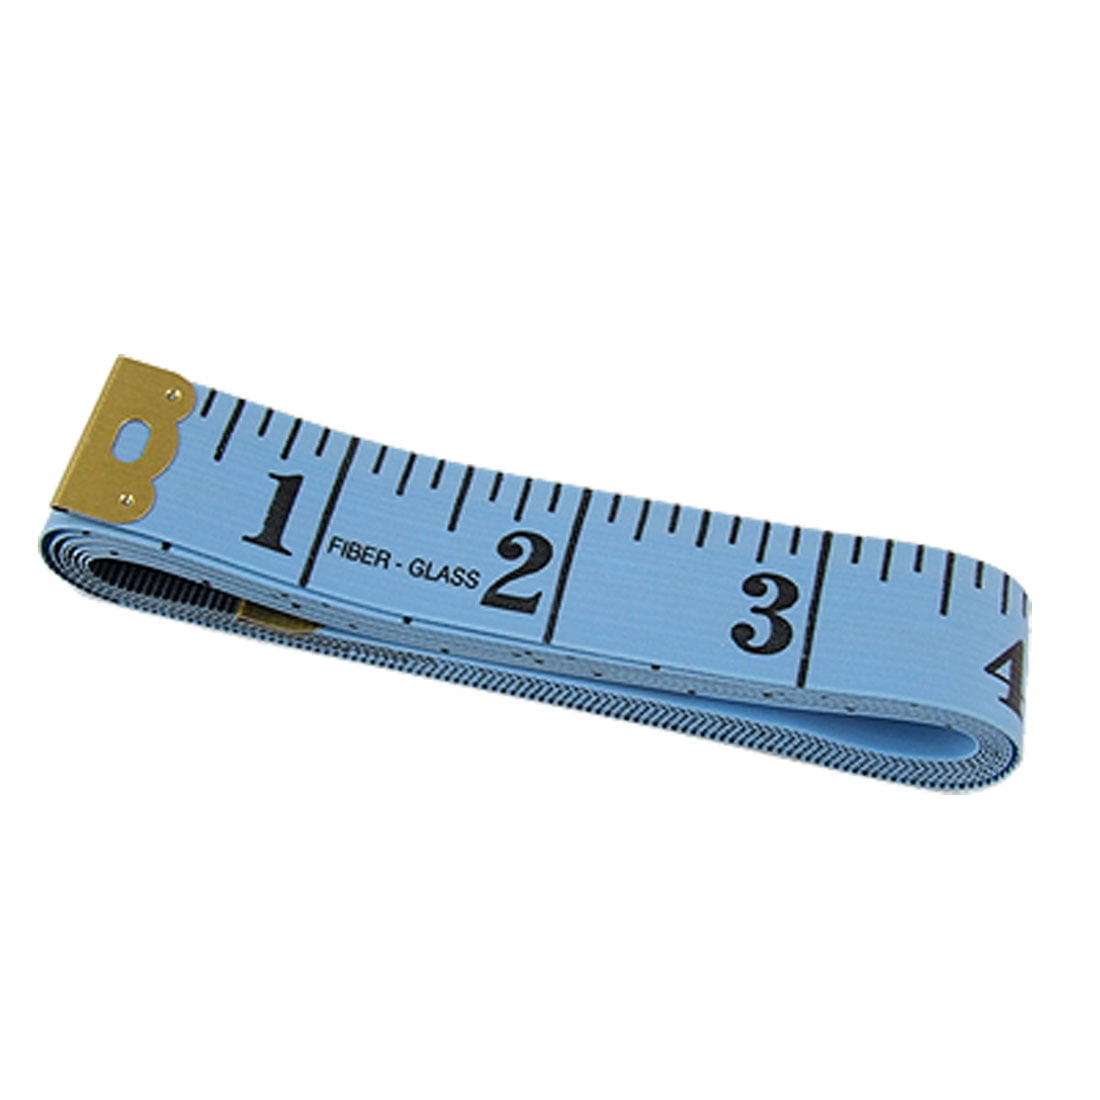 Top Notch 60 Retractable Double Sided Tape Measure - Navy - Quilting Supplies - Sewing Supplies